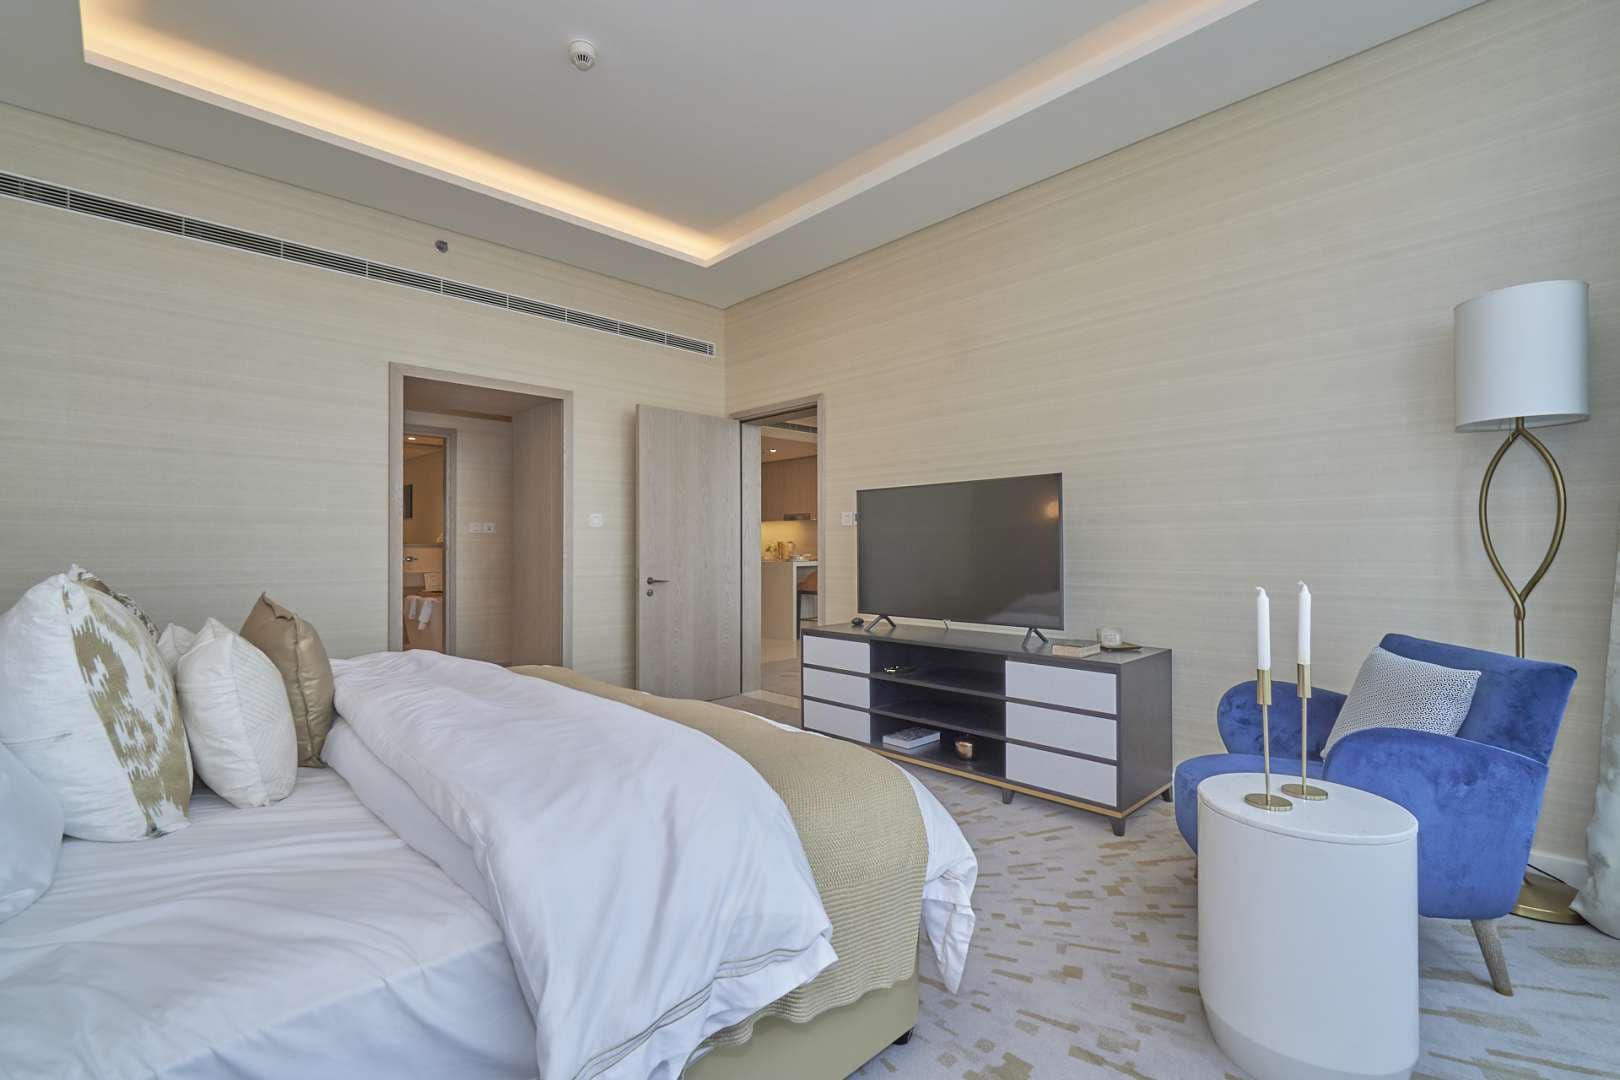 1 Bedroom Apartment For Sale The Palm Tower Lp07358 B788f2f0e8d4180.jpg